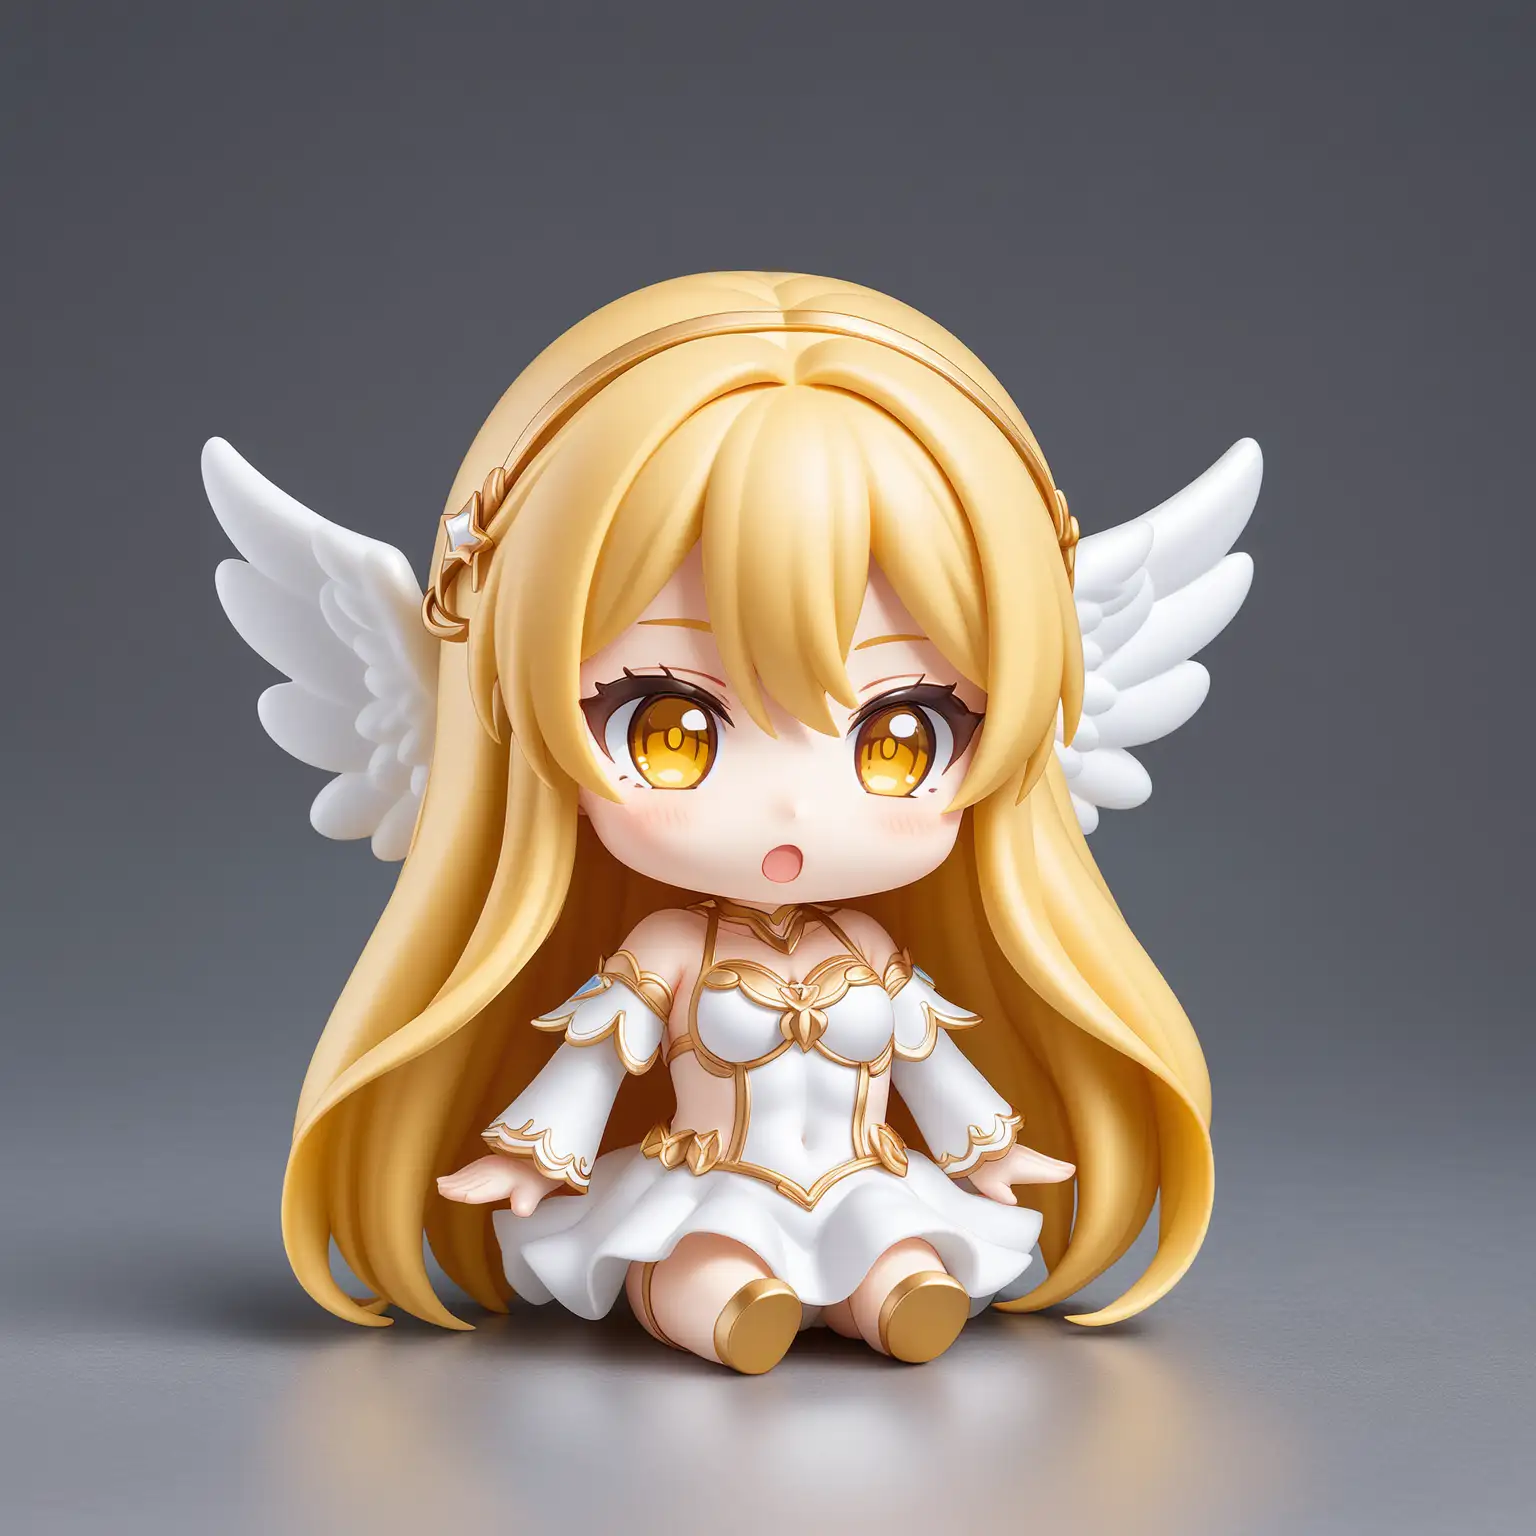 Anime sexy women , sd style,  chibi style,  nendoroid, art toys, big head,  playful, sitting on the floor , light pink angel costume, angel wing , blonde long hair, full body, no background.